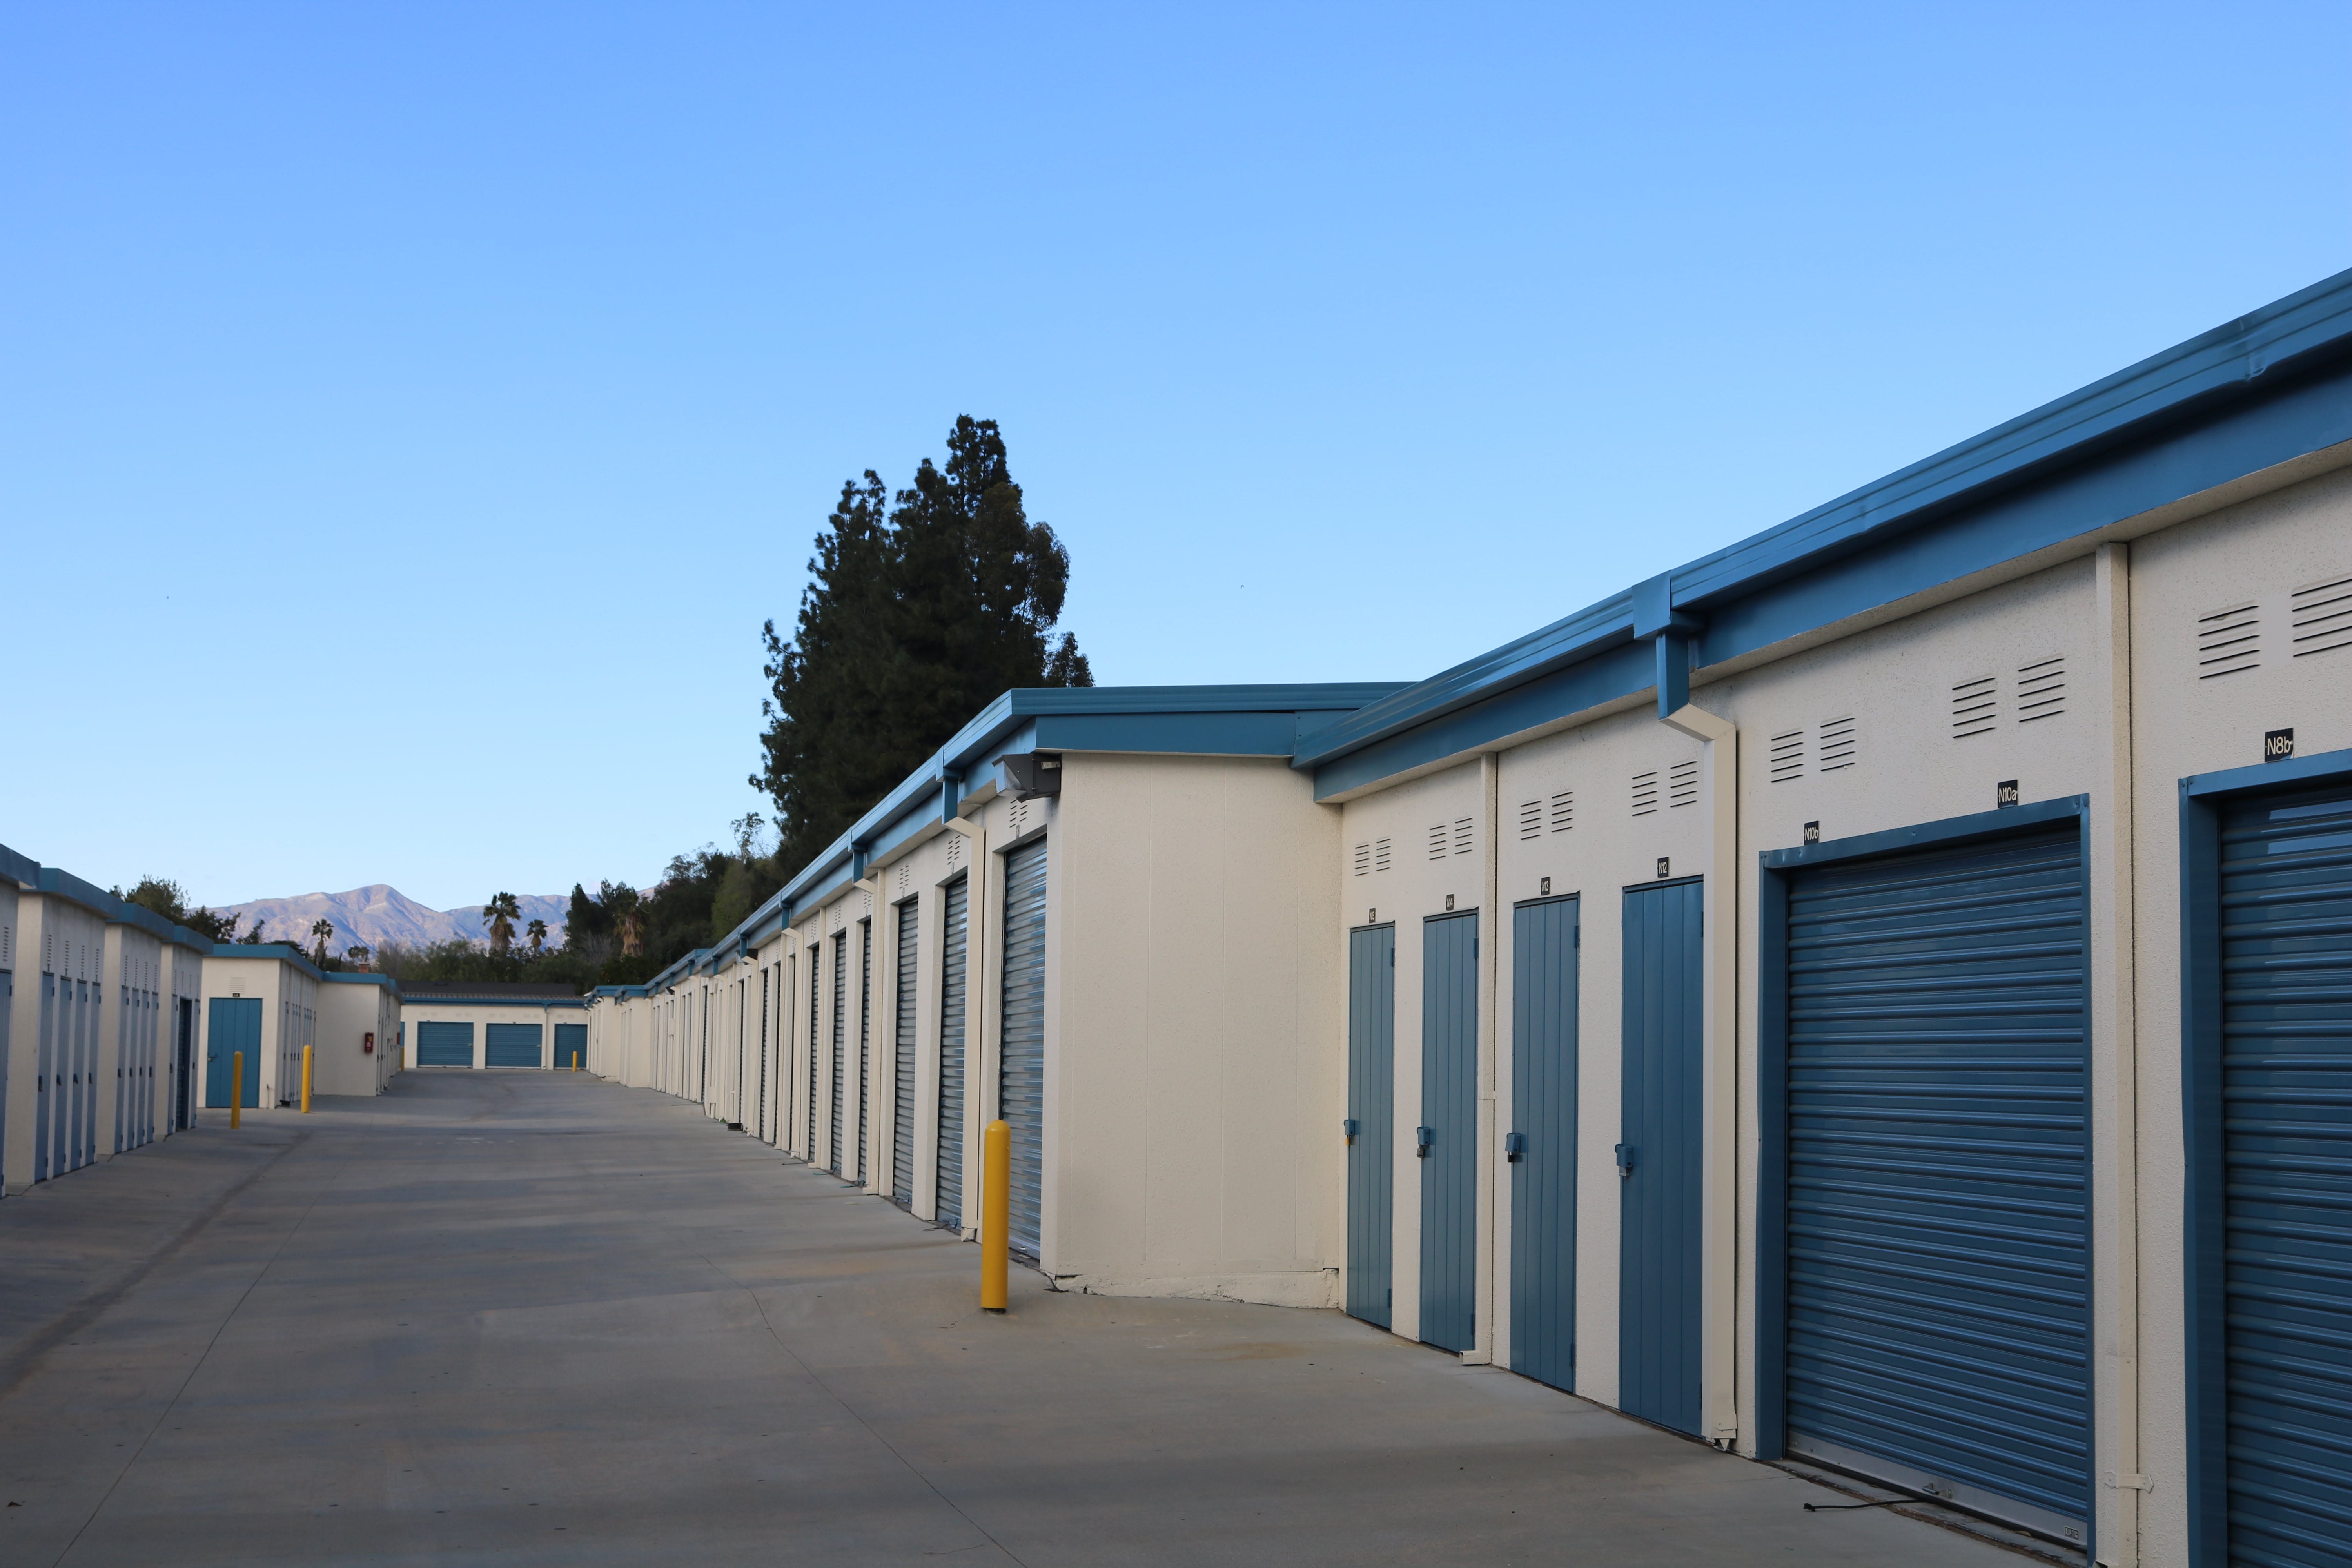 Wide lanes between units at Golden State Storage - Roscoe in North Hills, California